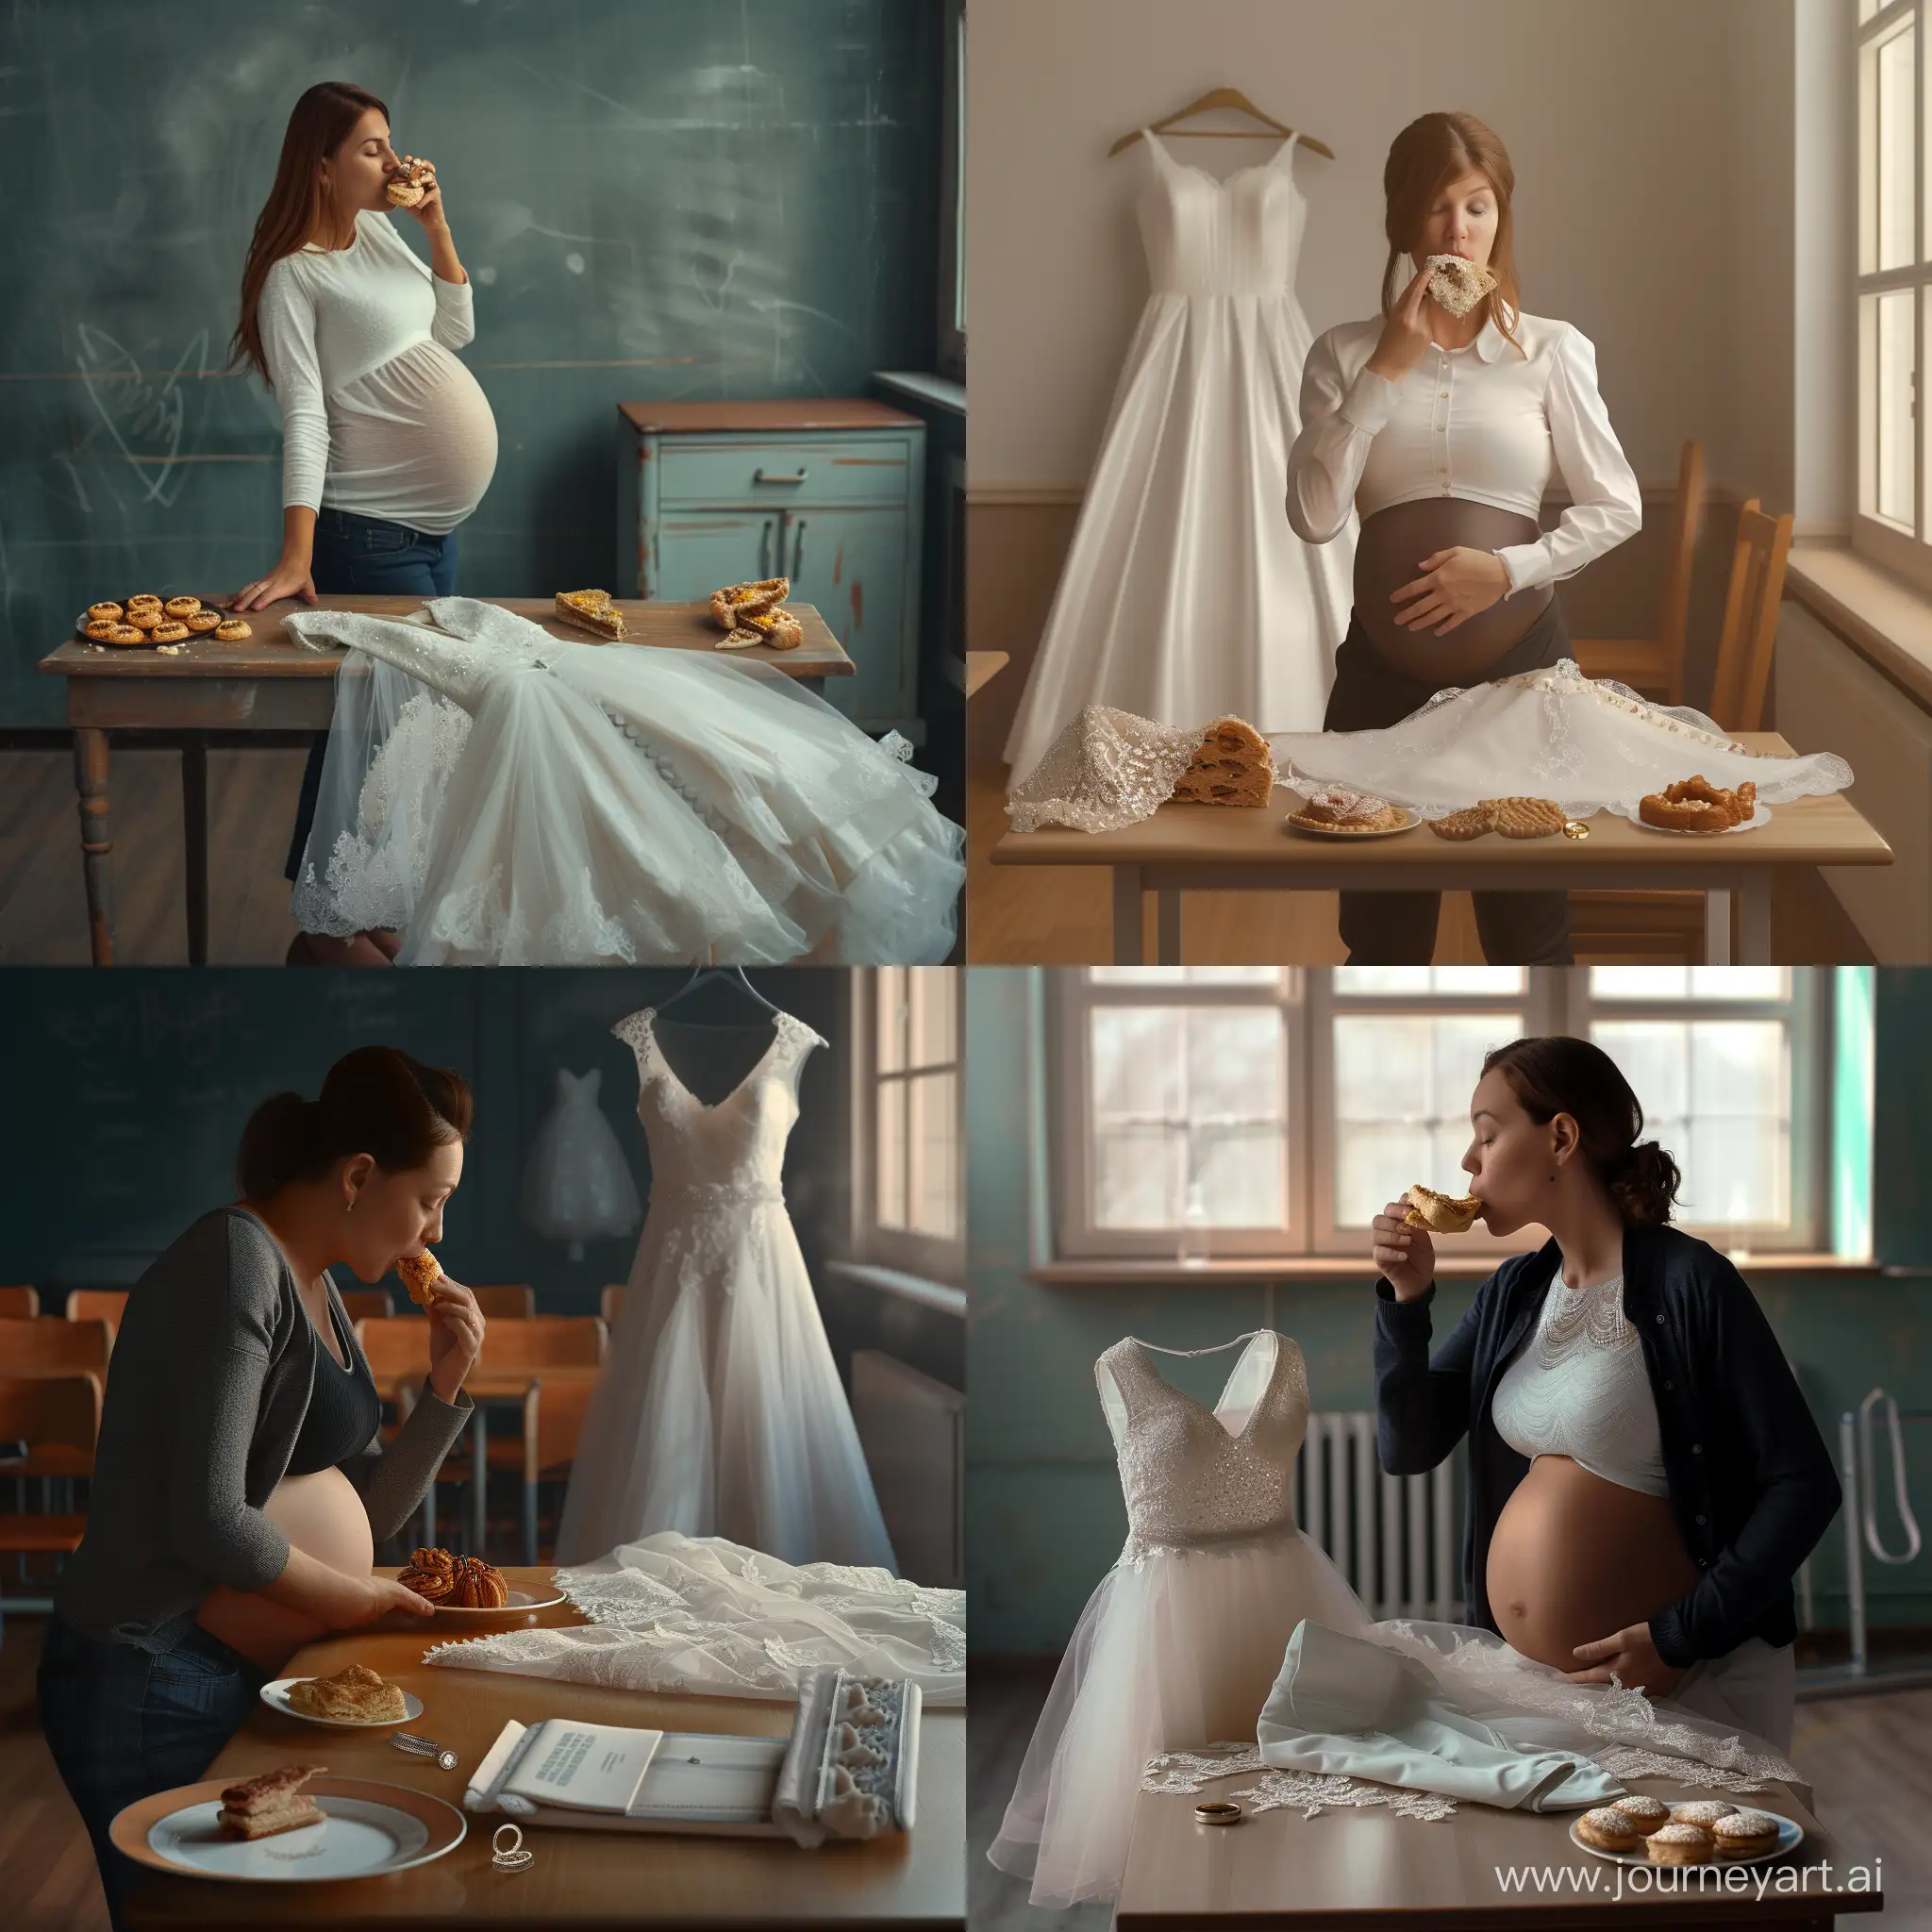 Teacher-Woman-Eating-Pastries-in-Class-with-Wedding-Dress-and-Ring-Nearby